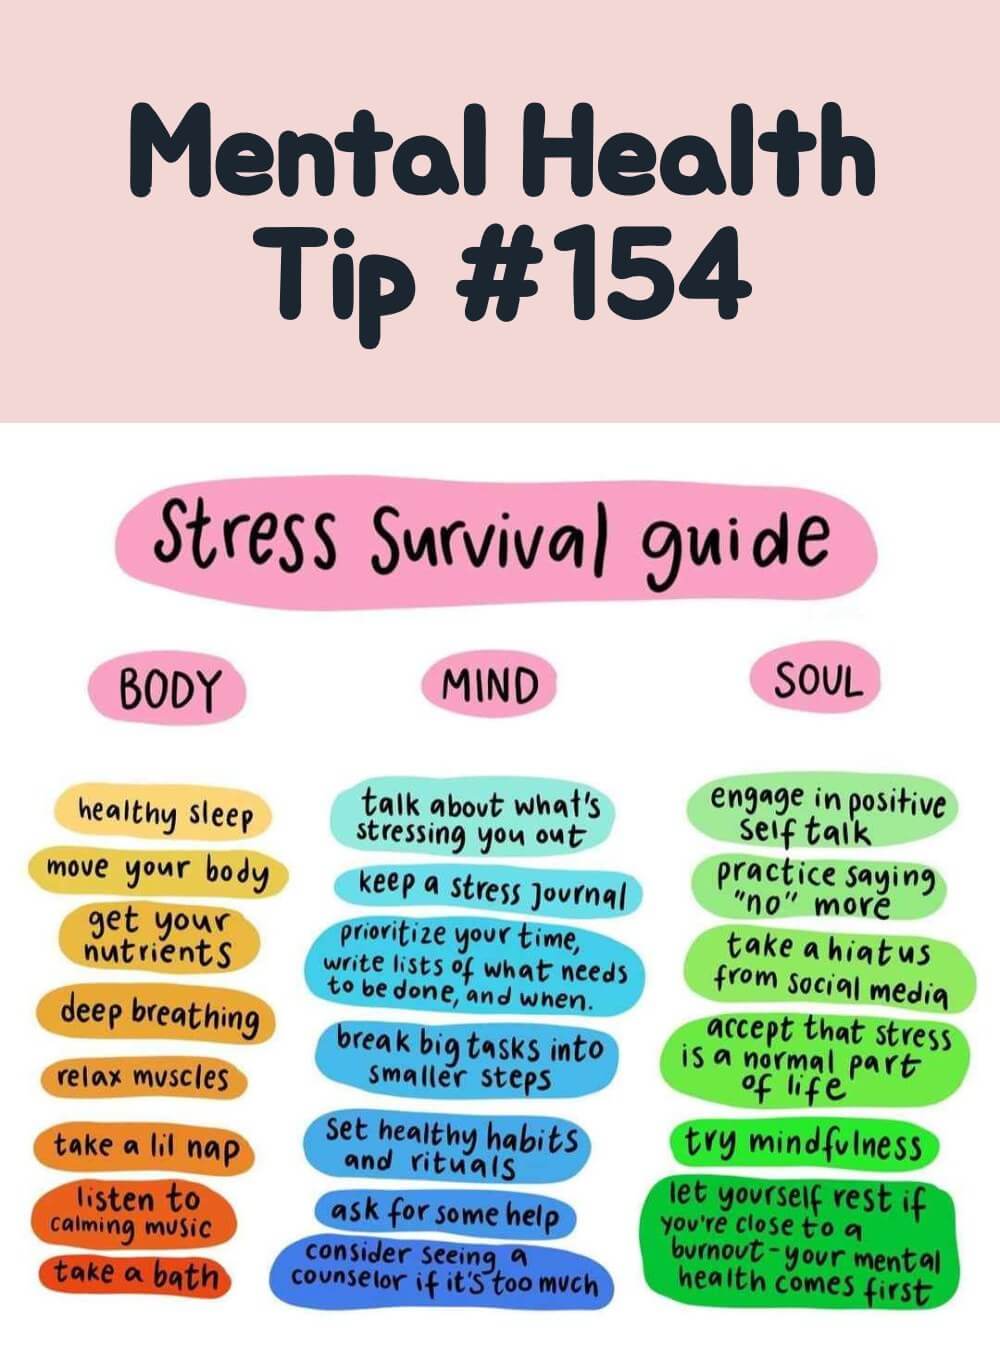 Emotional Well-being Infographic | Mental Health Tip #154